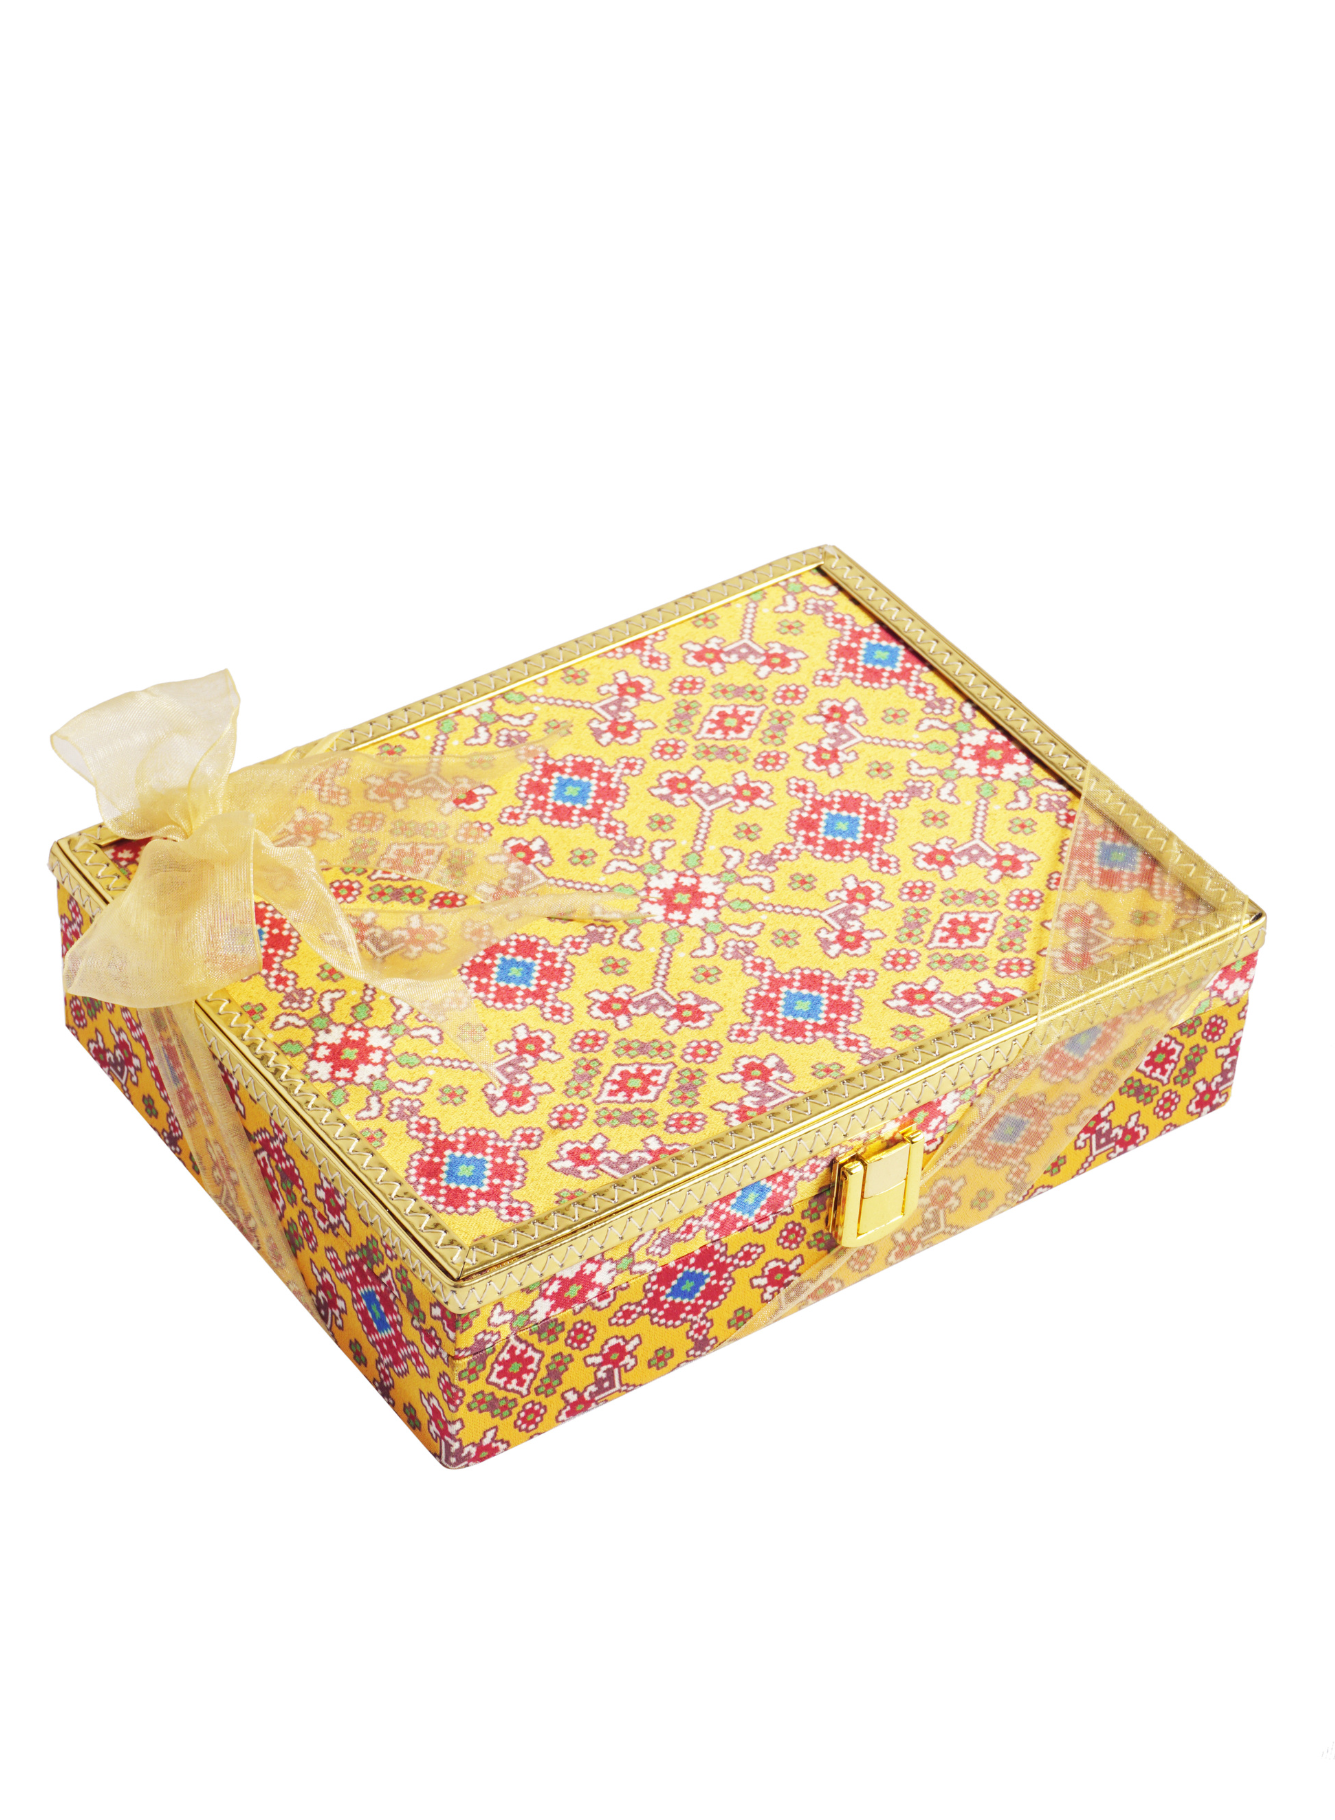 Safawi Dates with Yellow Patola MDF Box With Gold Leather Finish (21 Pcs)